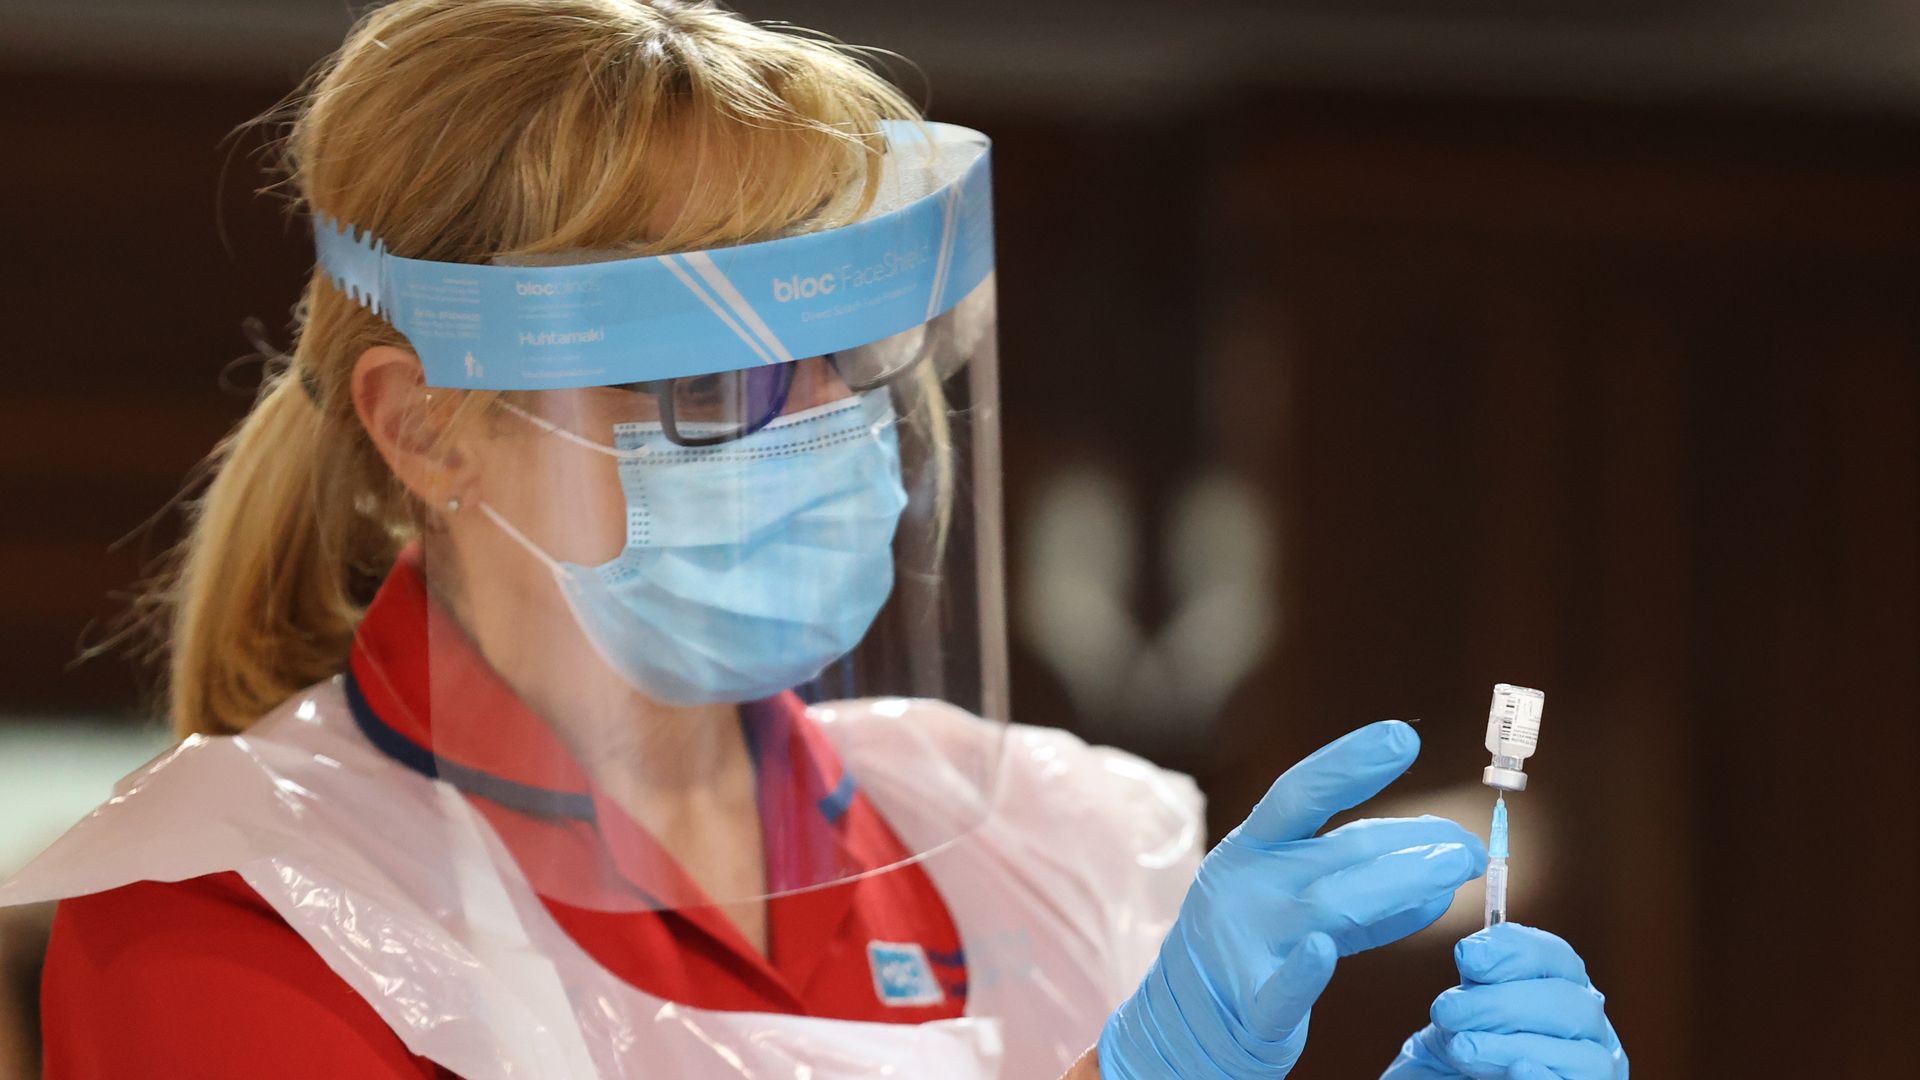 A nurse preparing an injection of Pfizer-BioNtech's covid-19 vaccine in Belfast on Dec. 6.